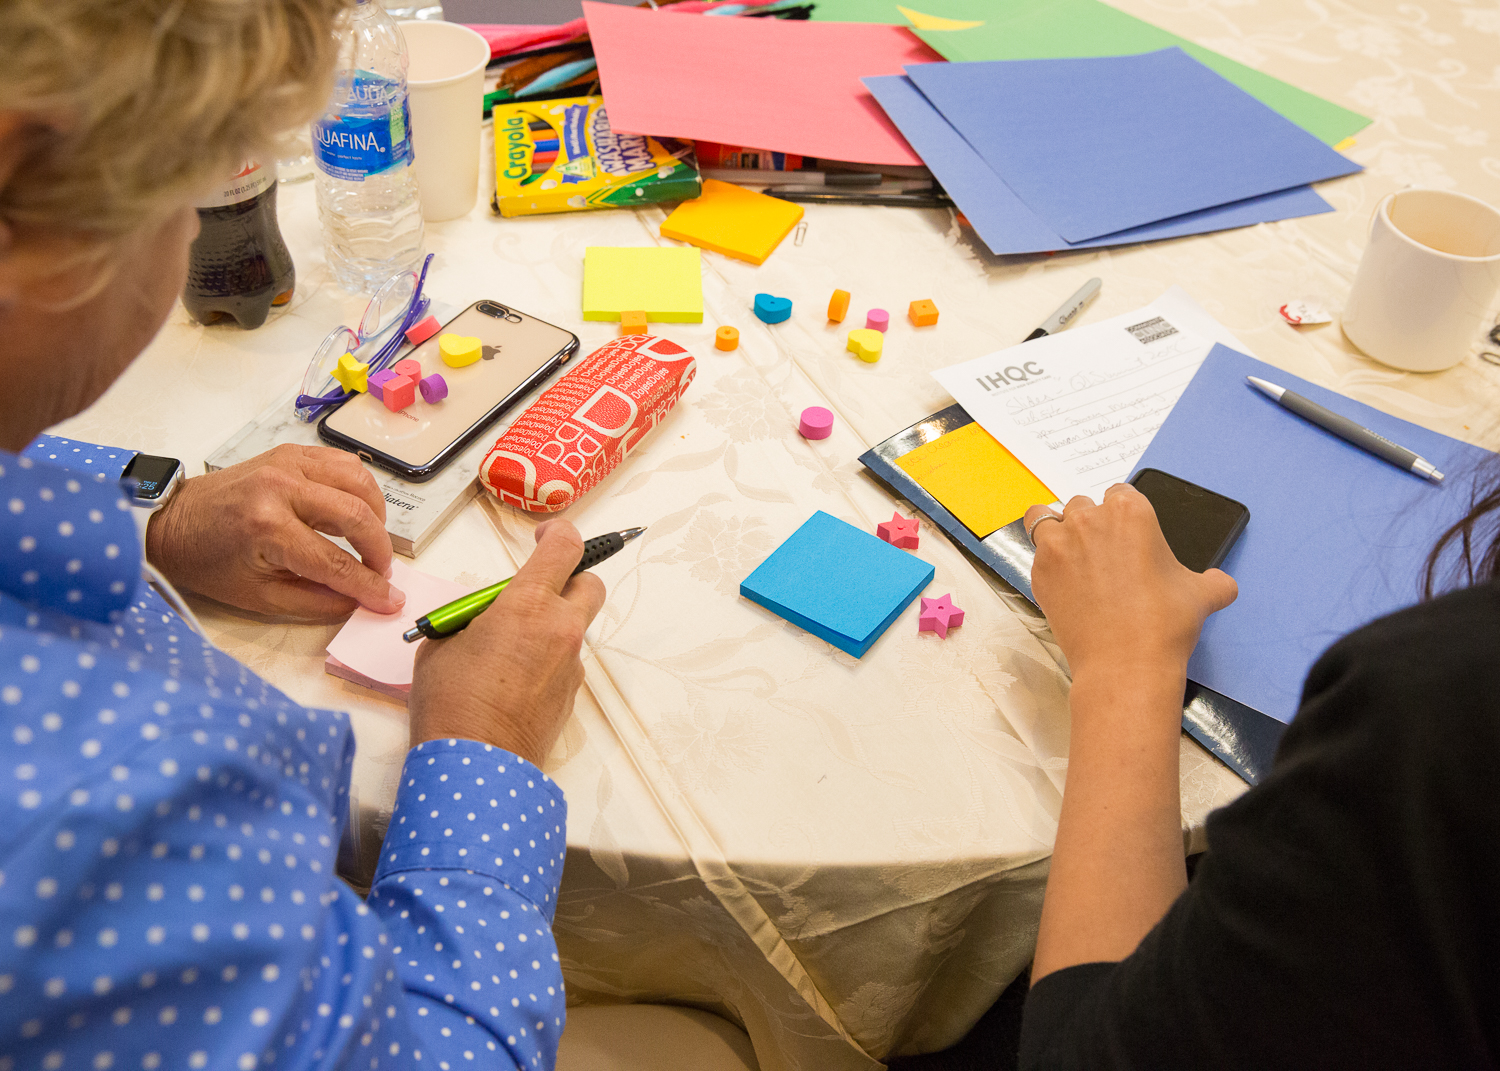 2 people sitting at a table with brightly-colored workshop materials